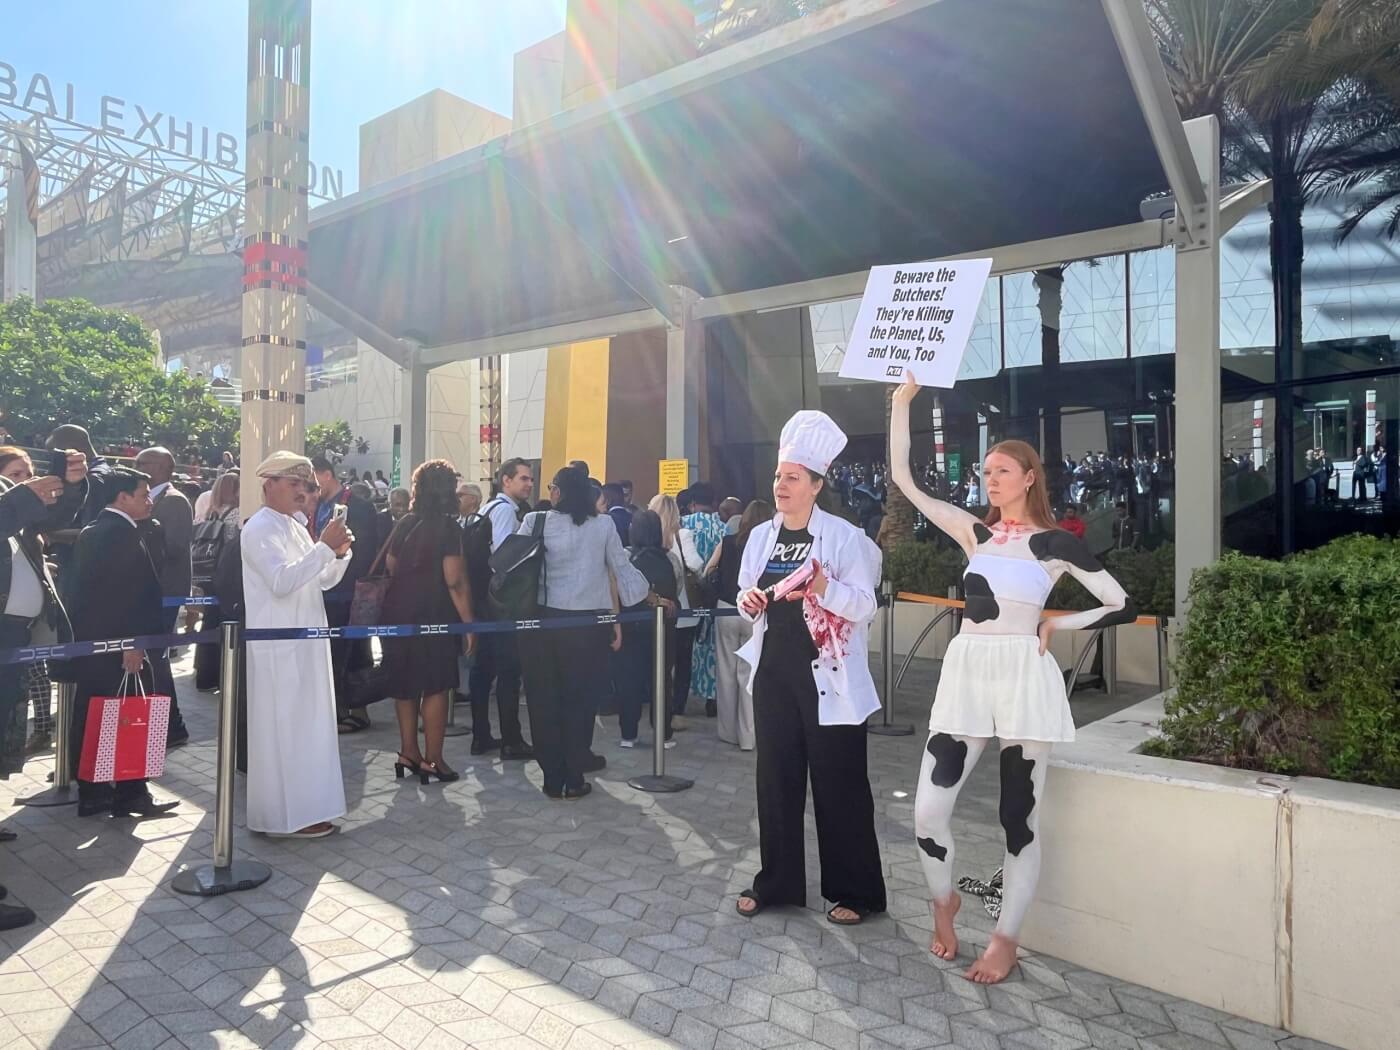 at COP28, a PETA U.K. 'cow' and 'butcher' raise awareness outside the Conference with a sign that reads "Beware the Butchers! They're Killing the Planet, Us, and You, Too"